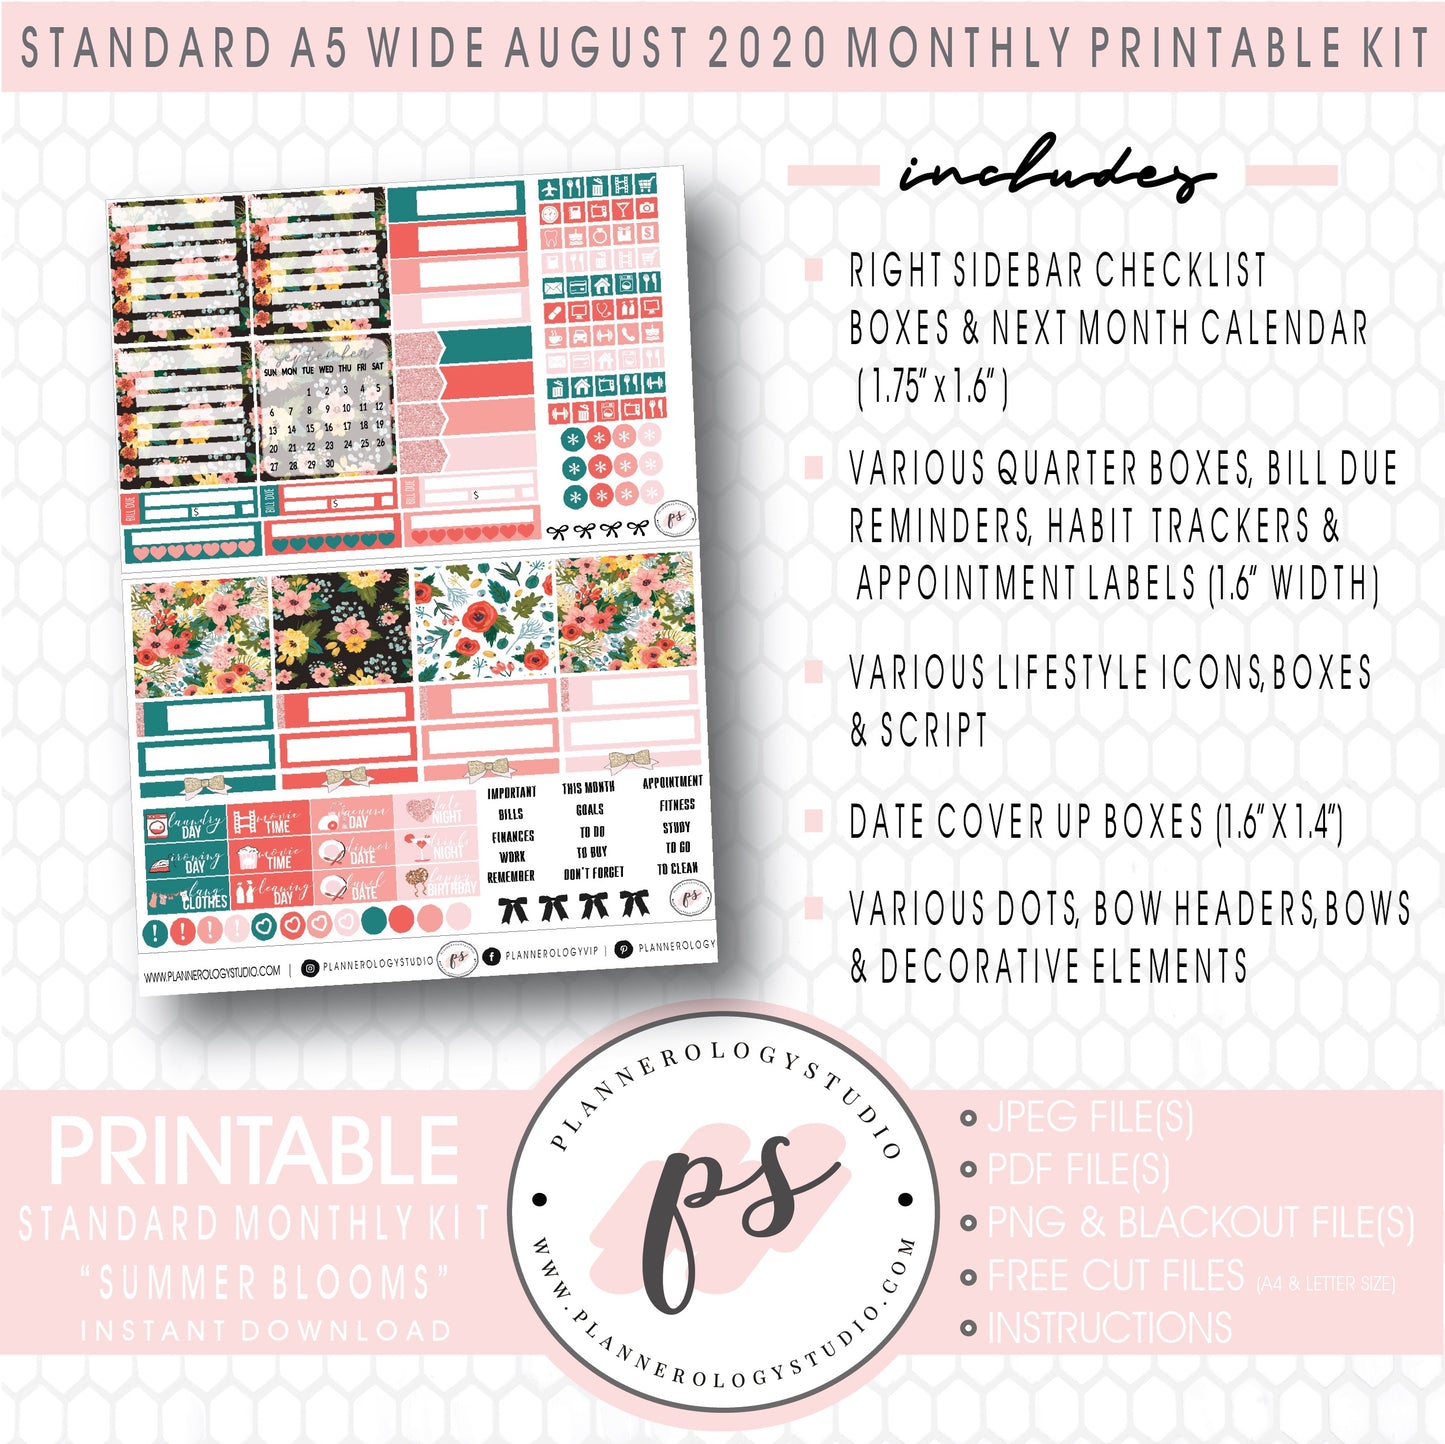 Summer Blooms August 2020 Monthly Kit Digital Printable Planner Stickers (for use with Standard A5 Wide Planners)